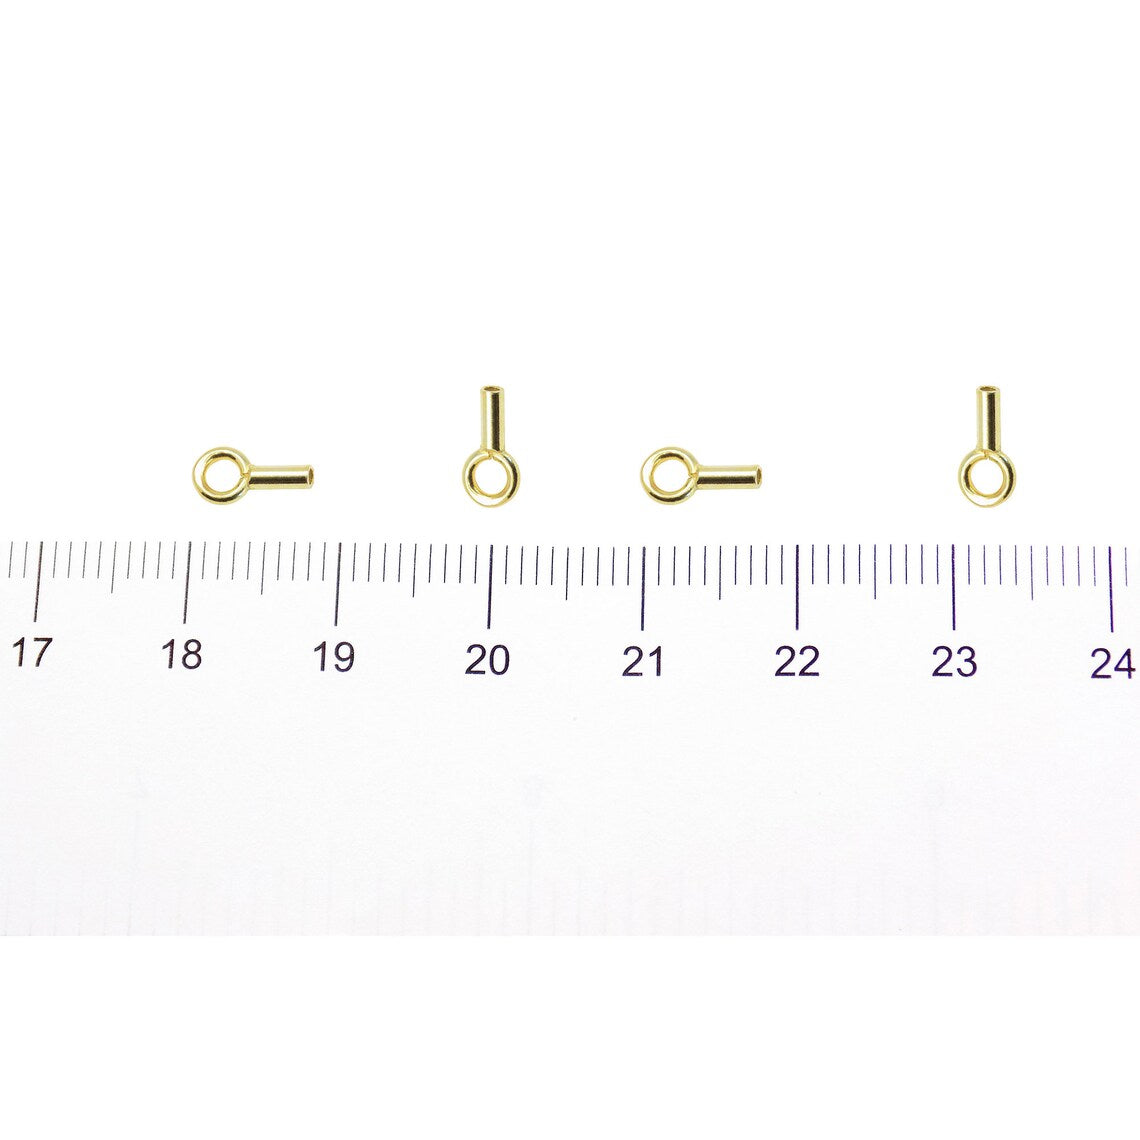 Crimp End Cap with Ring ID: 1.00mm Gold Plated over 925 Sterling Silver, Tube End Cap